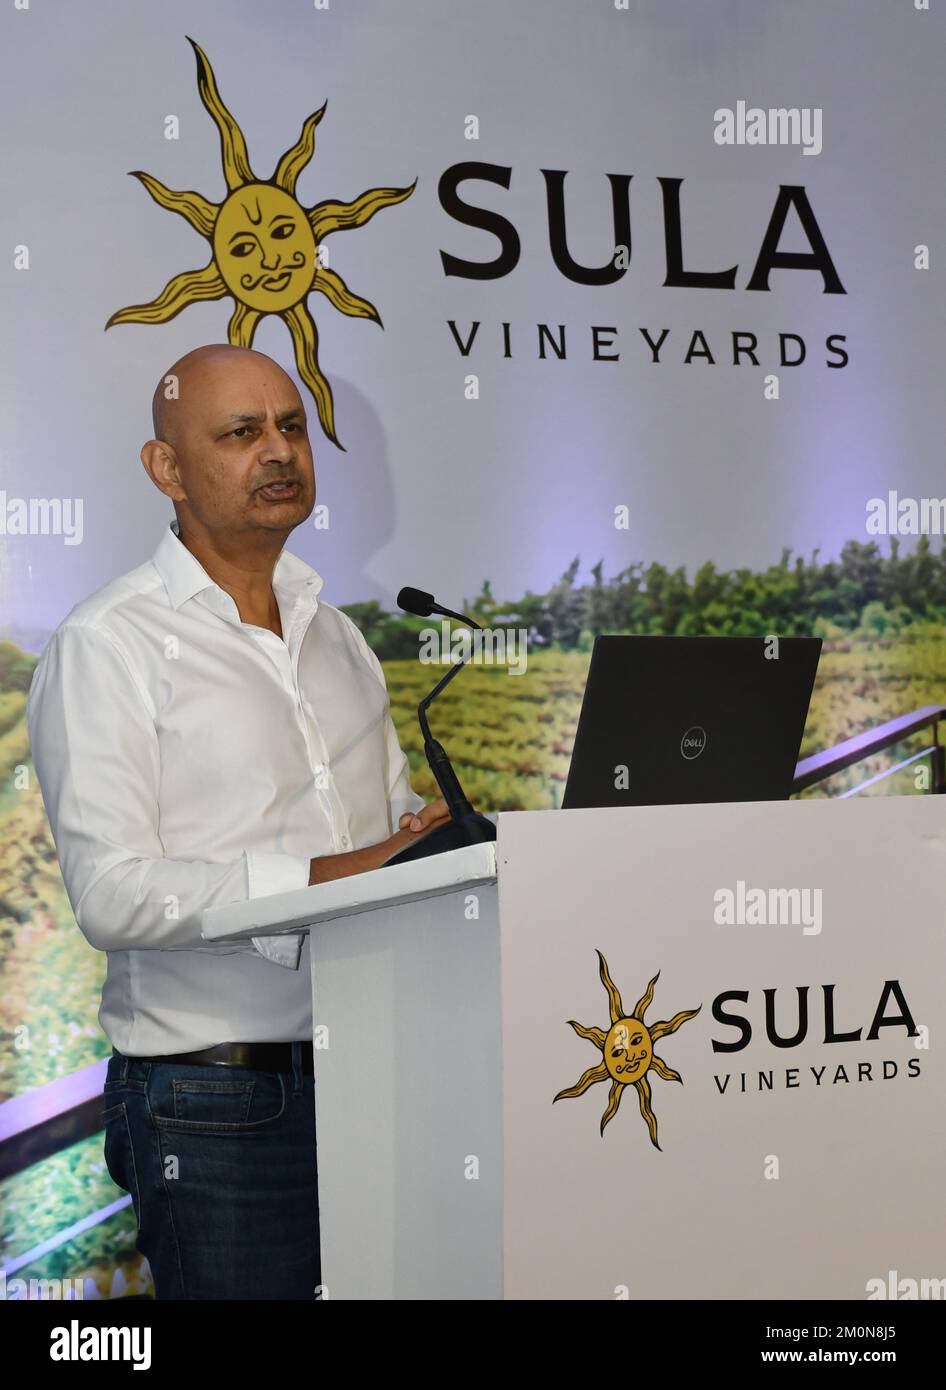 Founder, Managing Director and Chief Executive Officer, Rajeev Samant, Sula Vineyards speaks during a press conference to announce Initial Public Offer (IPO) in Mumbai Sula vineyards is India's largest wine maker. The price band for the Initial Public Offer (IPO) per share will be in the range of Rs.340-357 per share and it will be open for subscription from 12th December 2022 till 14th December 2022 and it will be listed on the stock exchange on 22nd December 2022. (Photo by Ashish Vaishnav / SOPA Images/Sipa USA) Stock Photo